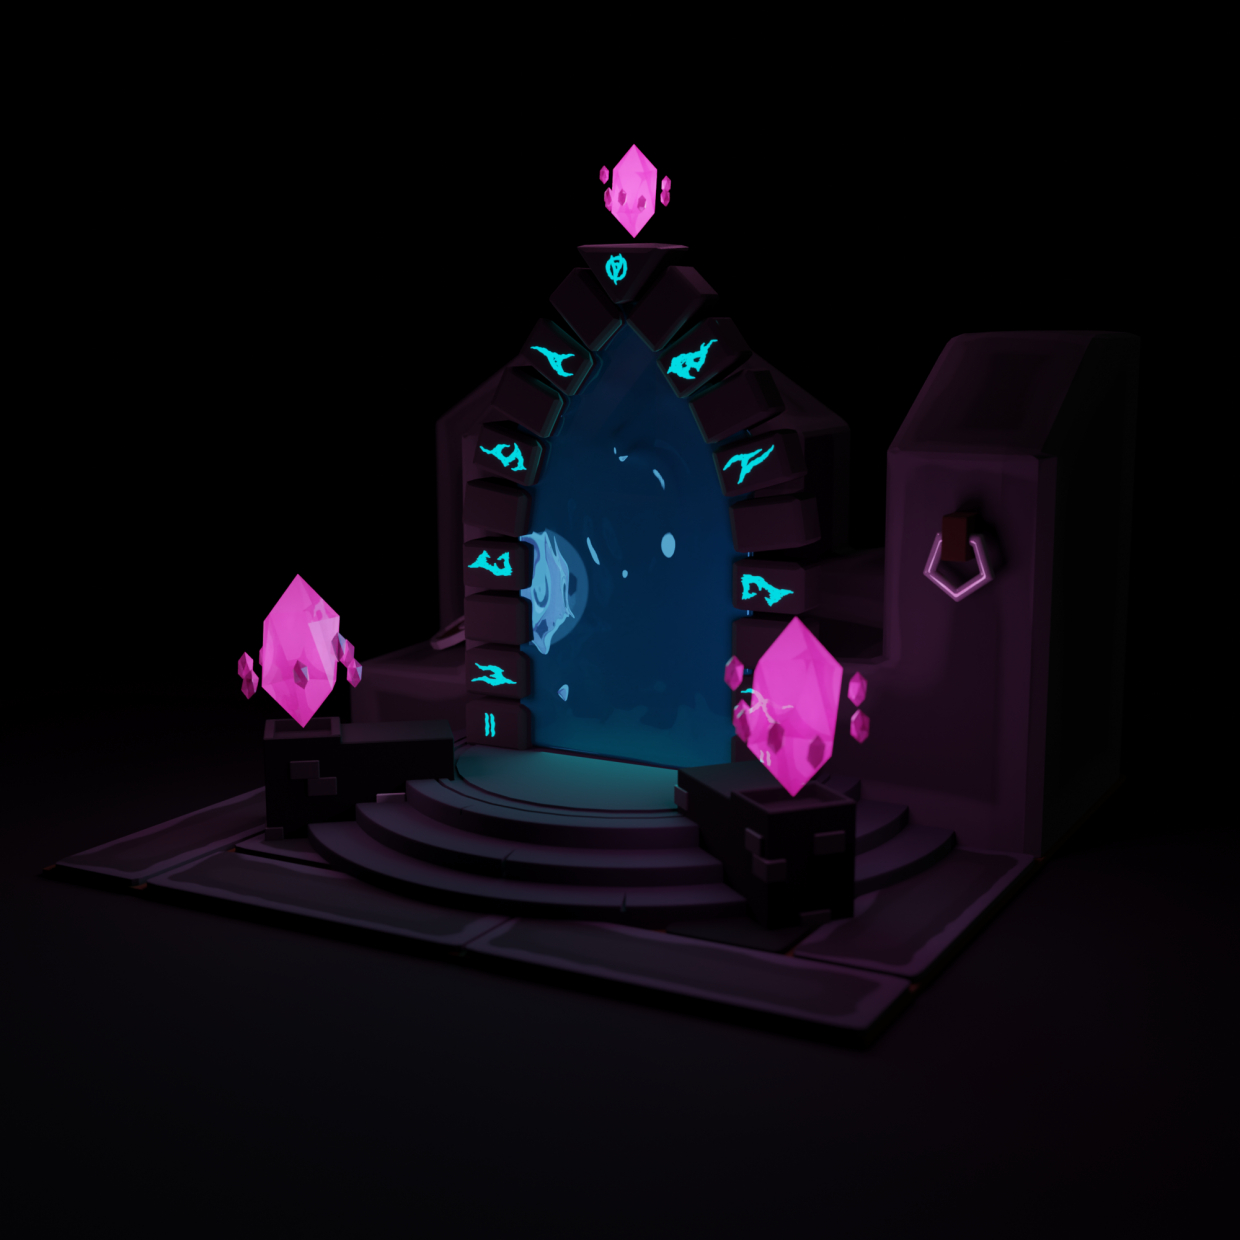 Magic portal (low poly) in Blender cycles render image